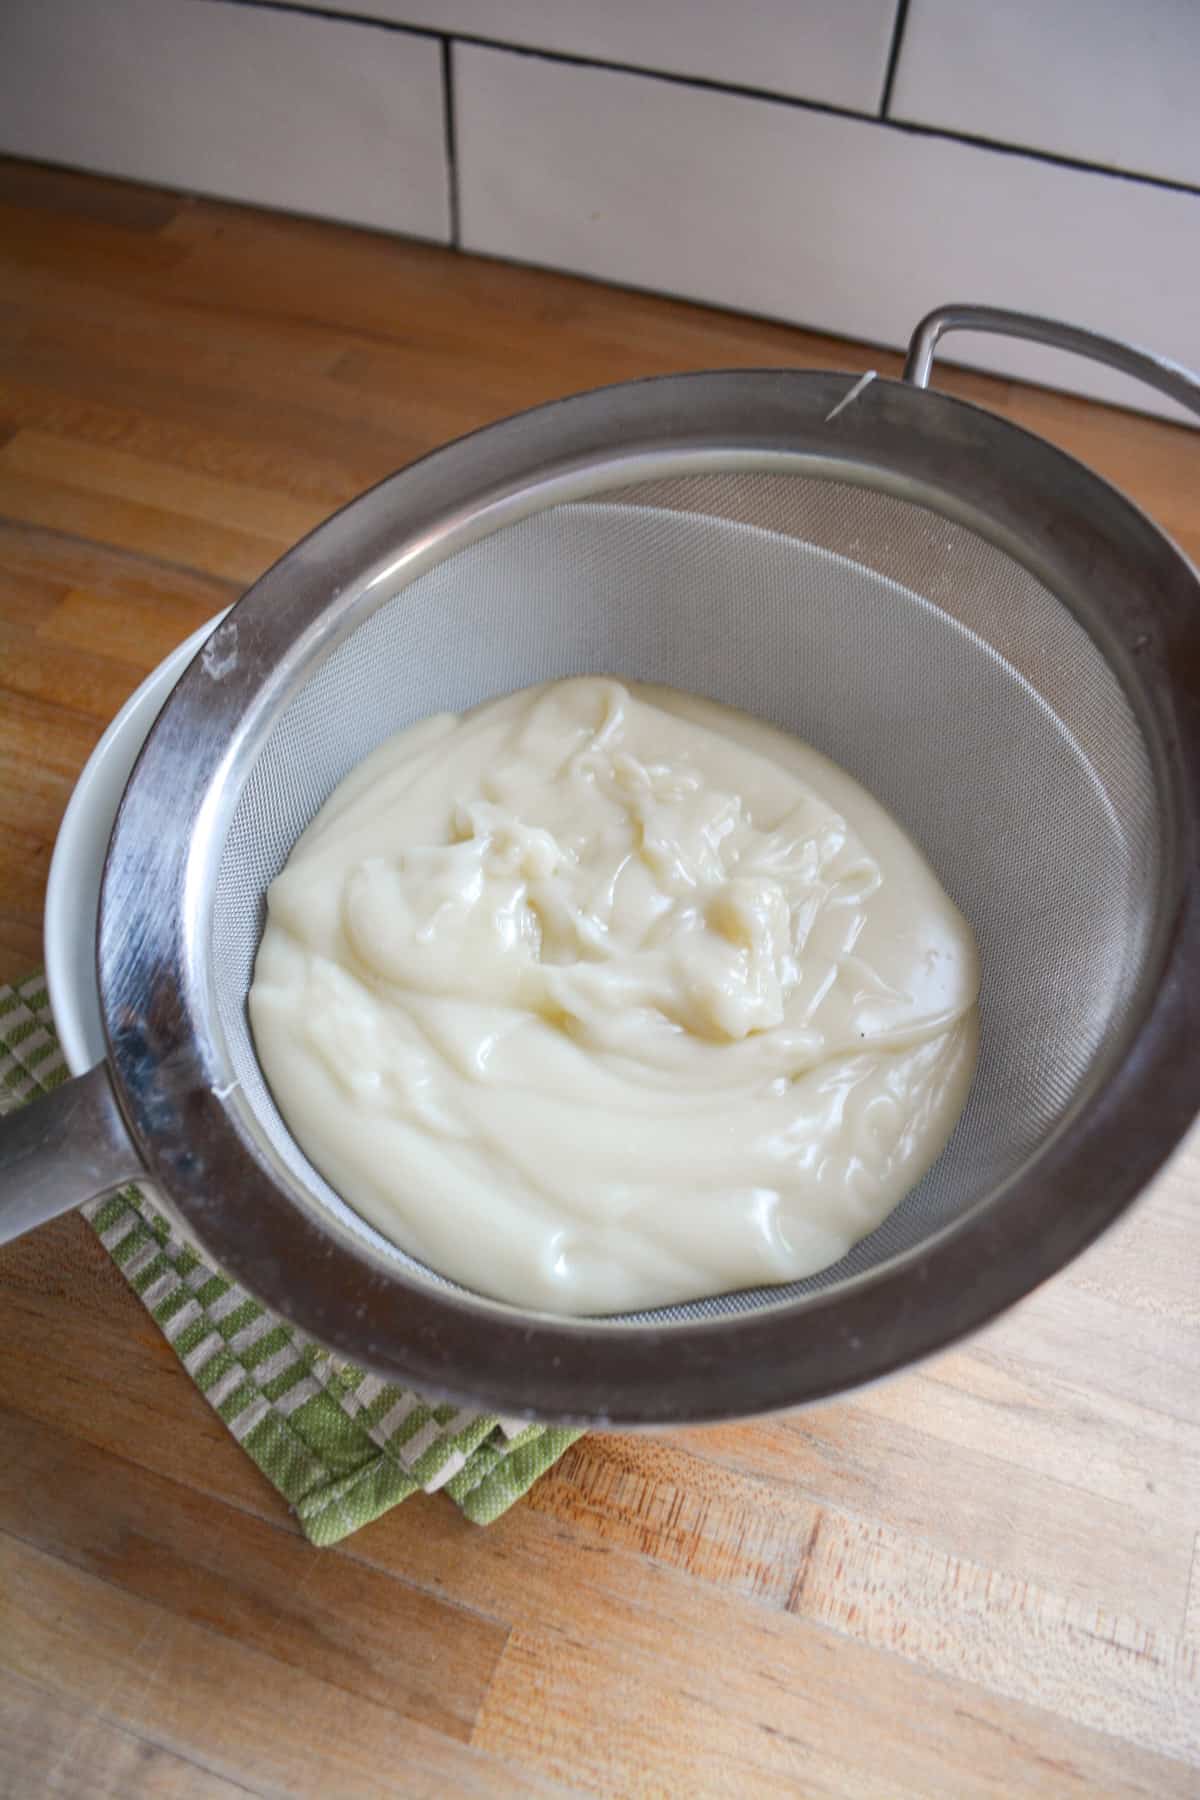 Dairy free custard being strained through a fine mesh strainer into a bowl.